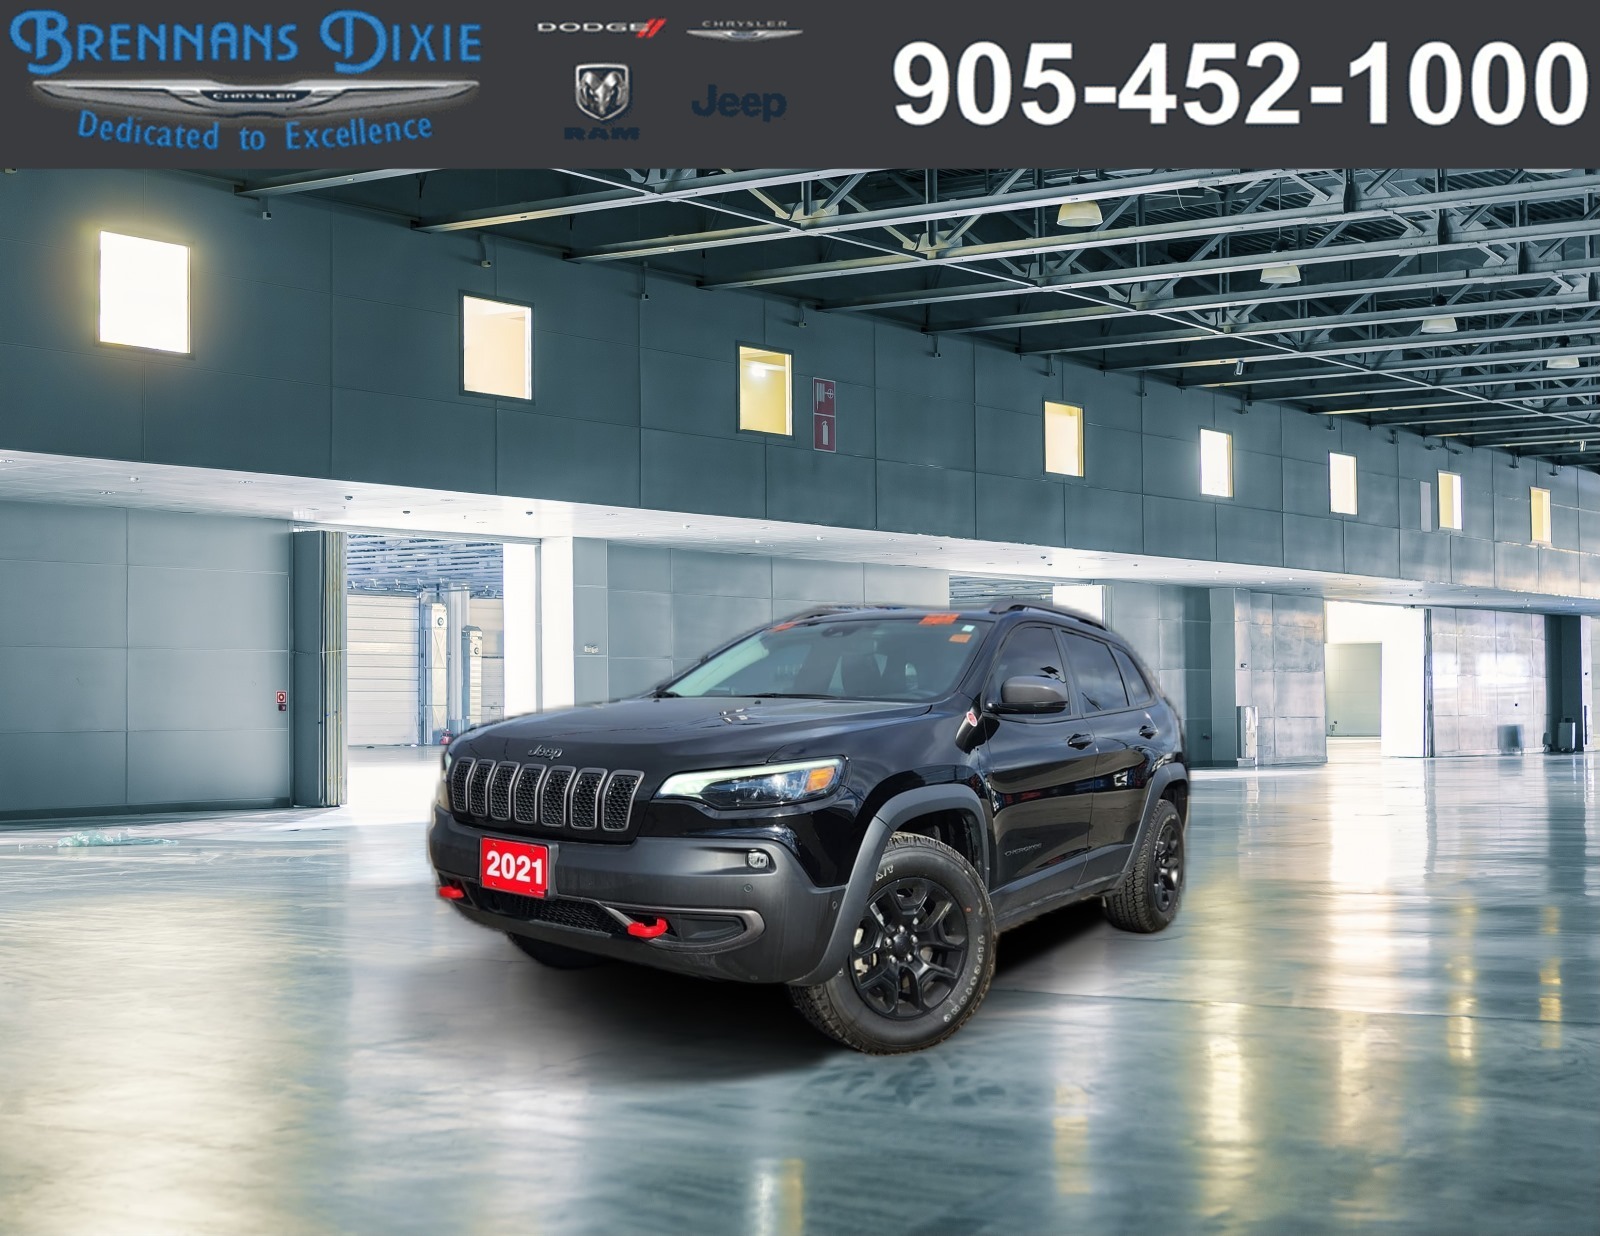 2021 Jeep Cherokee LEATHER, SUNROOF, NAV, TRAIL TOW, TECH PACKAGE